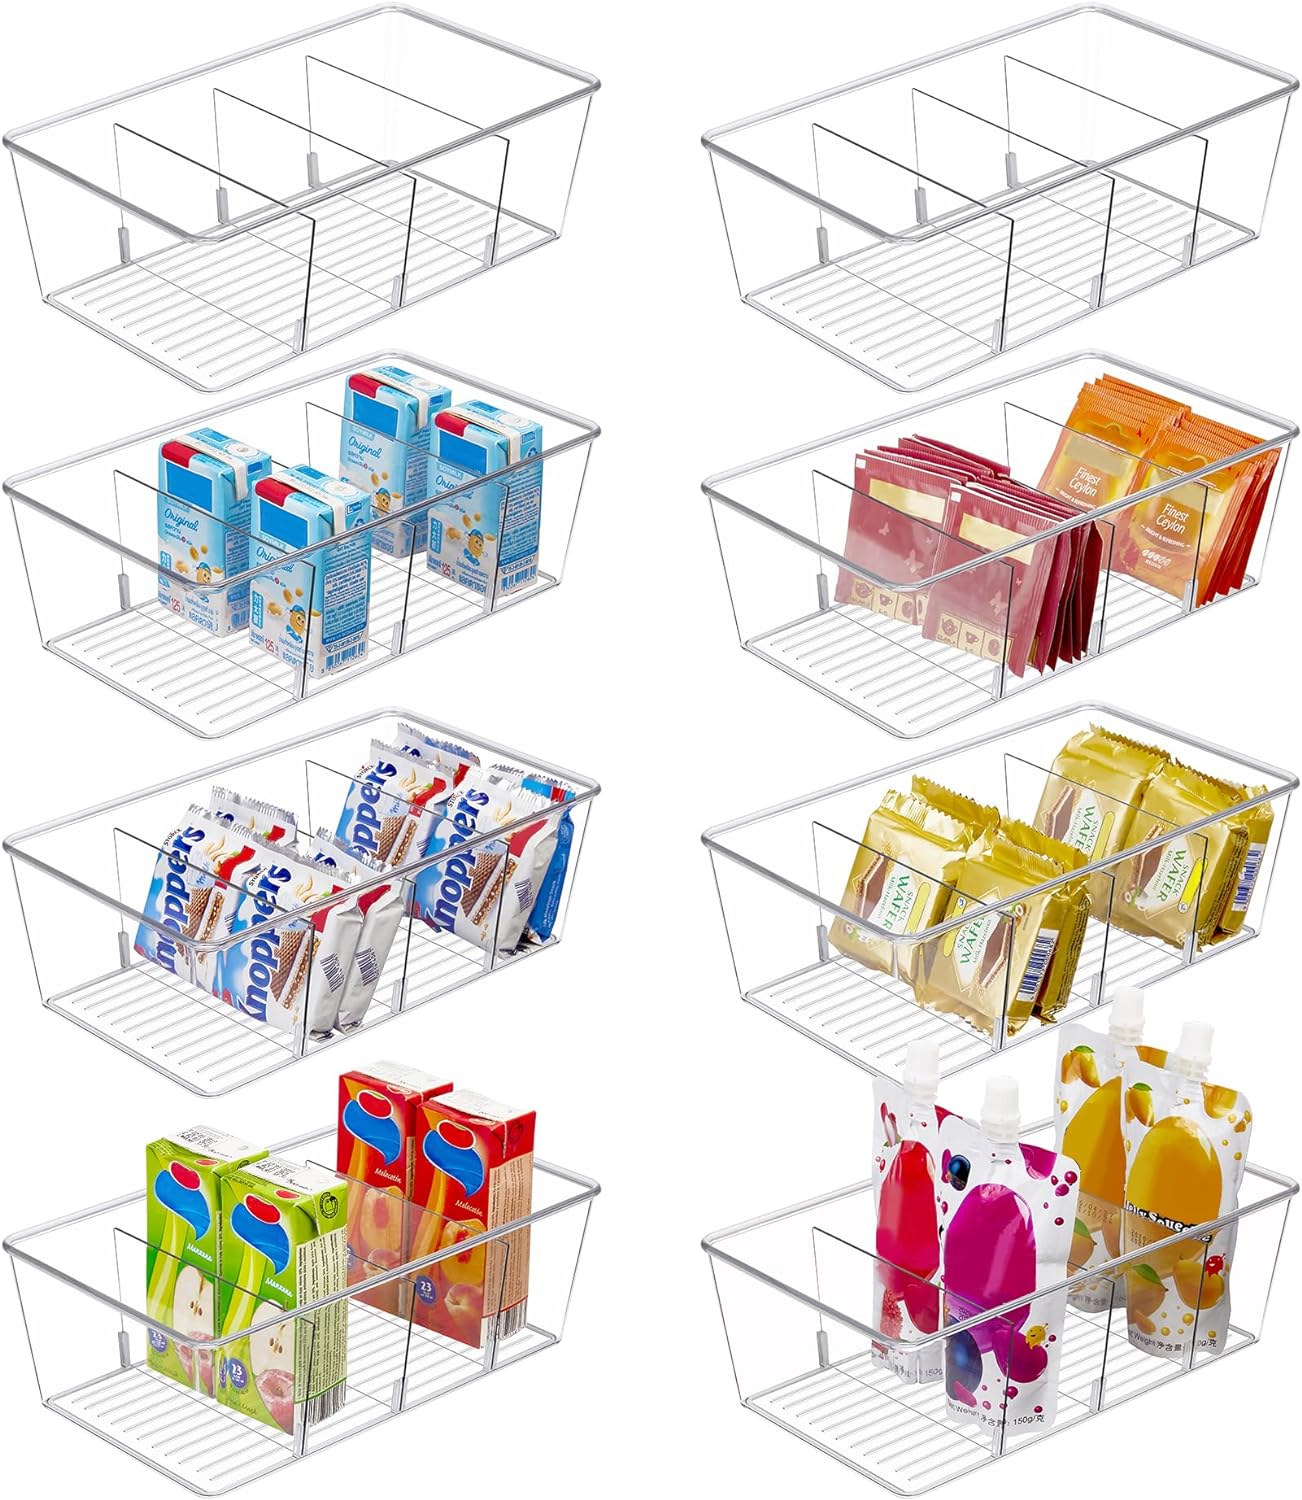 Vtopmart 8 Pack Food Storage Organizer Bins, Clear Plastic Bins for Pantry, Kitchen, Fridge, Cabinet Organization and Storage, 4 Compartment Holder for Packets, Snacks, Pouches, Spice Packets